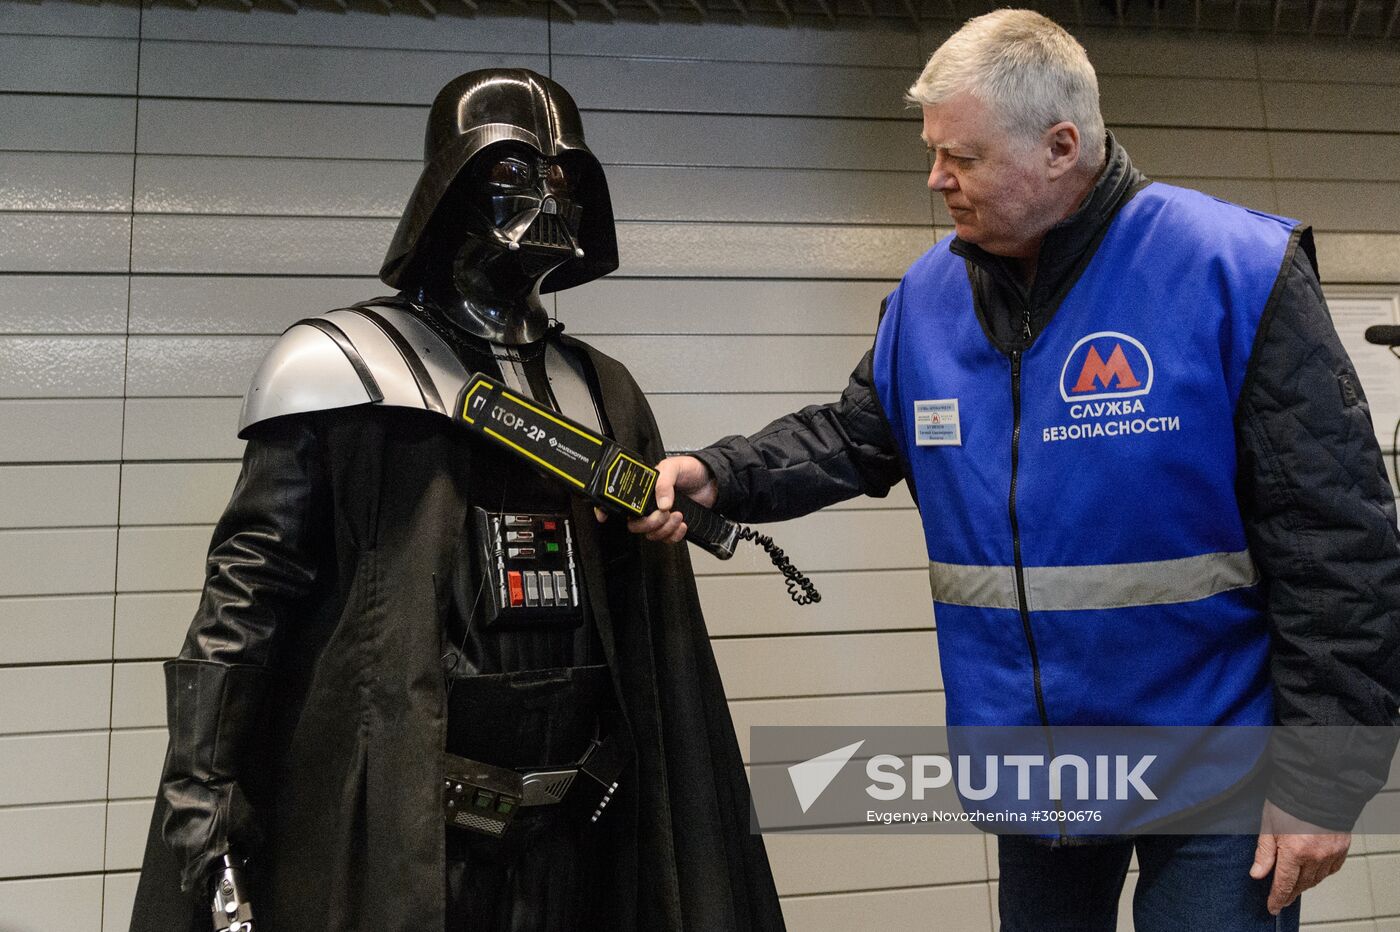 Star Wars day in Moscow metro